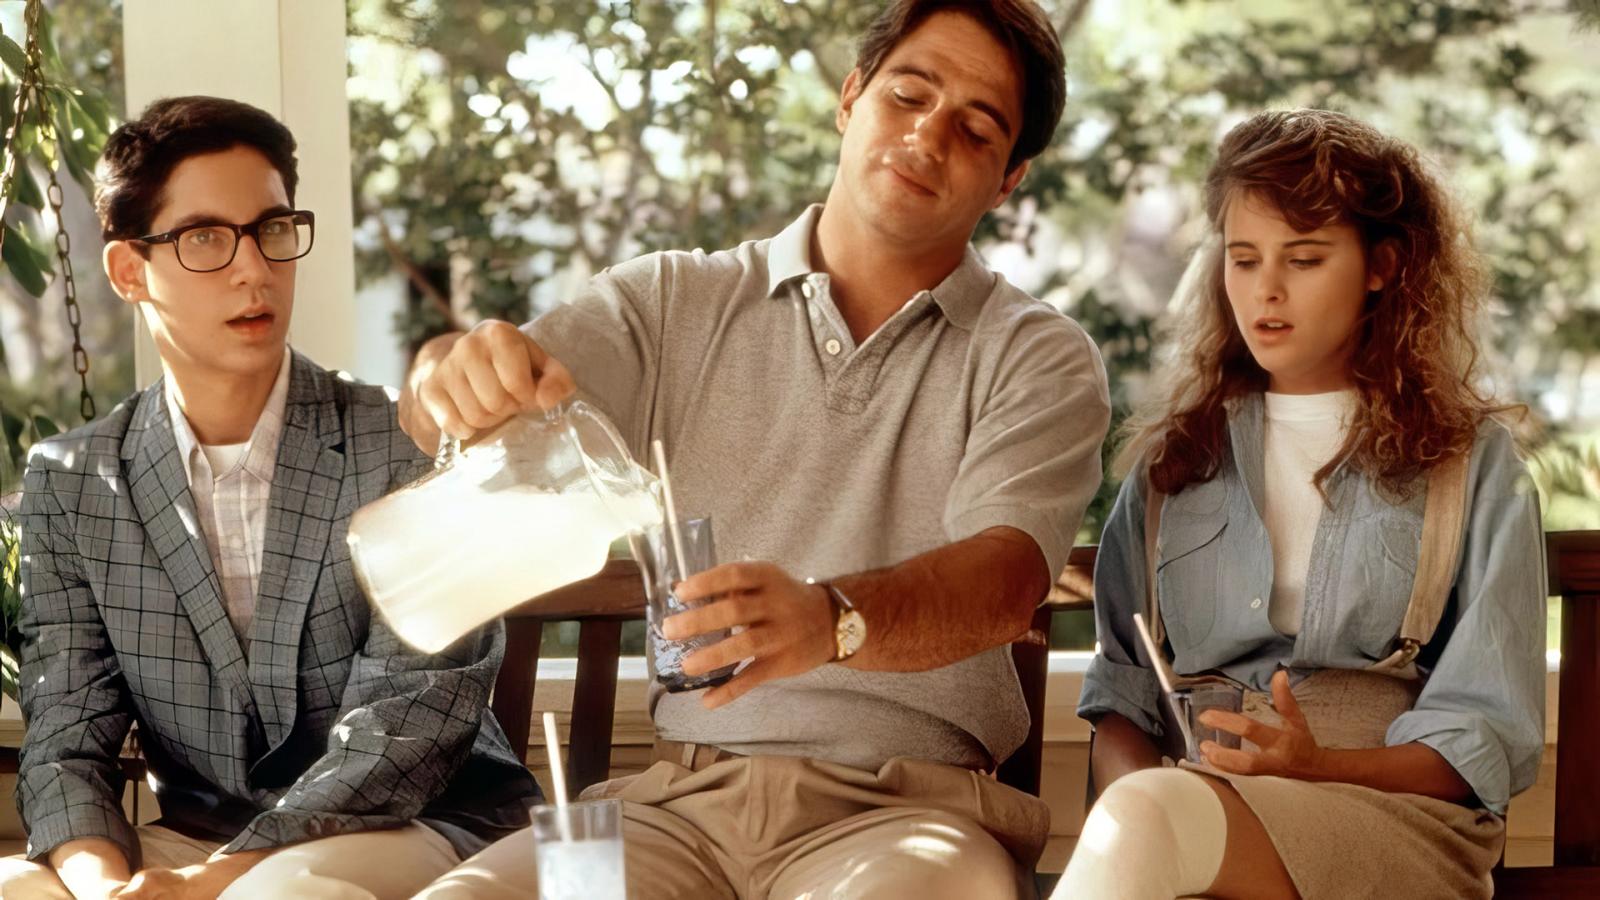 12 Forgotten Romantic Comedies of the '80s That Are Pure Gold - image 3